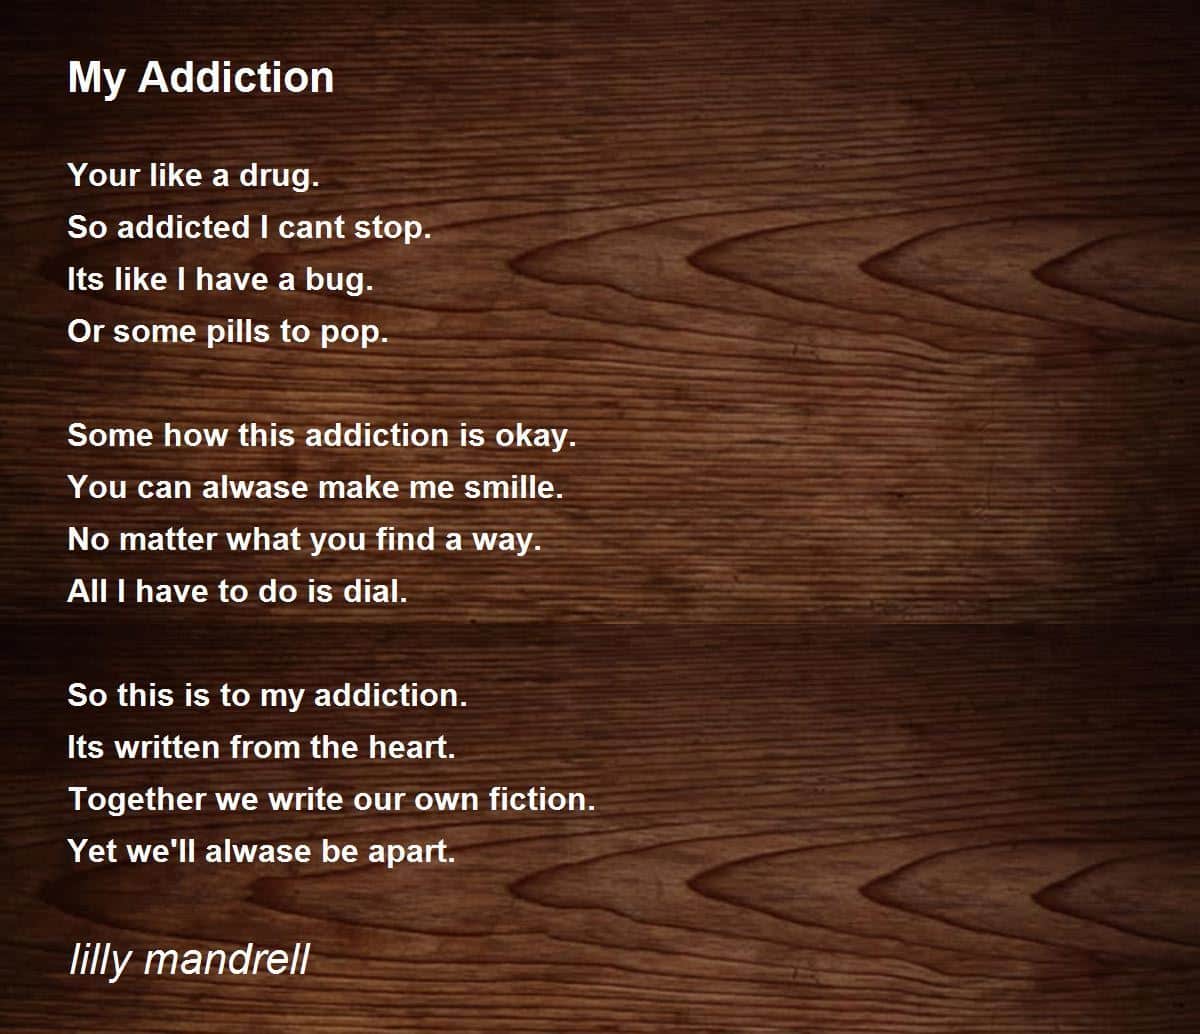 My Addiction Poem by lilly mandrell